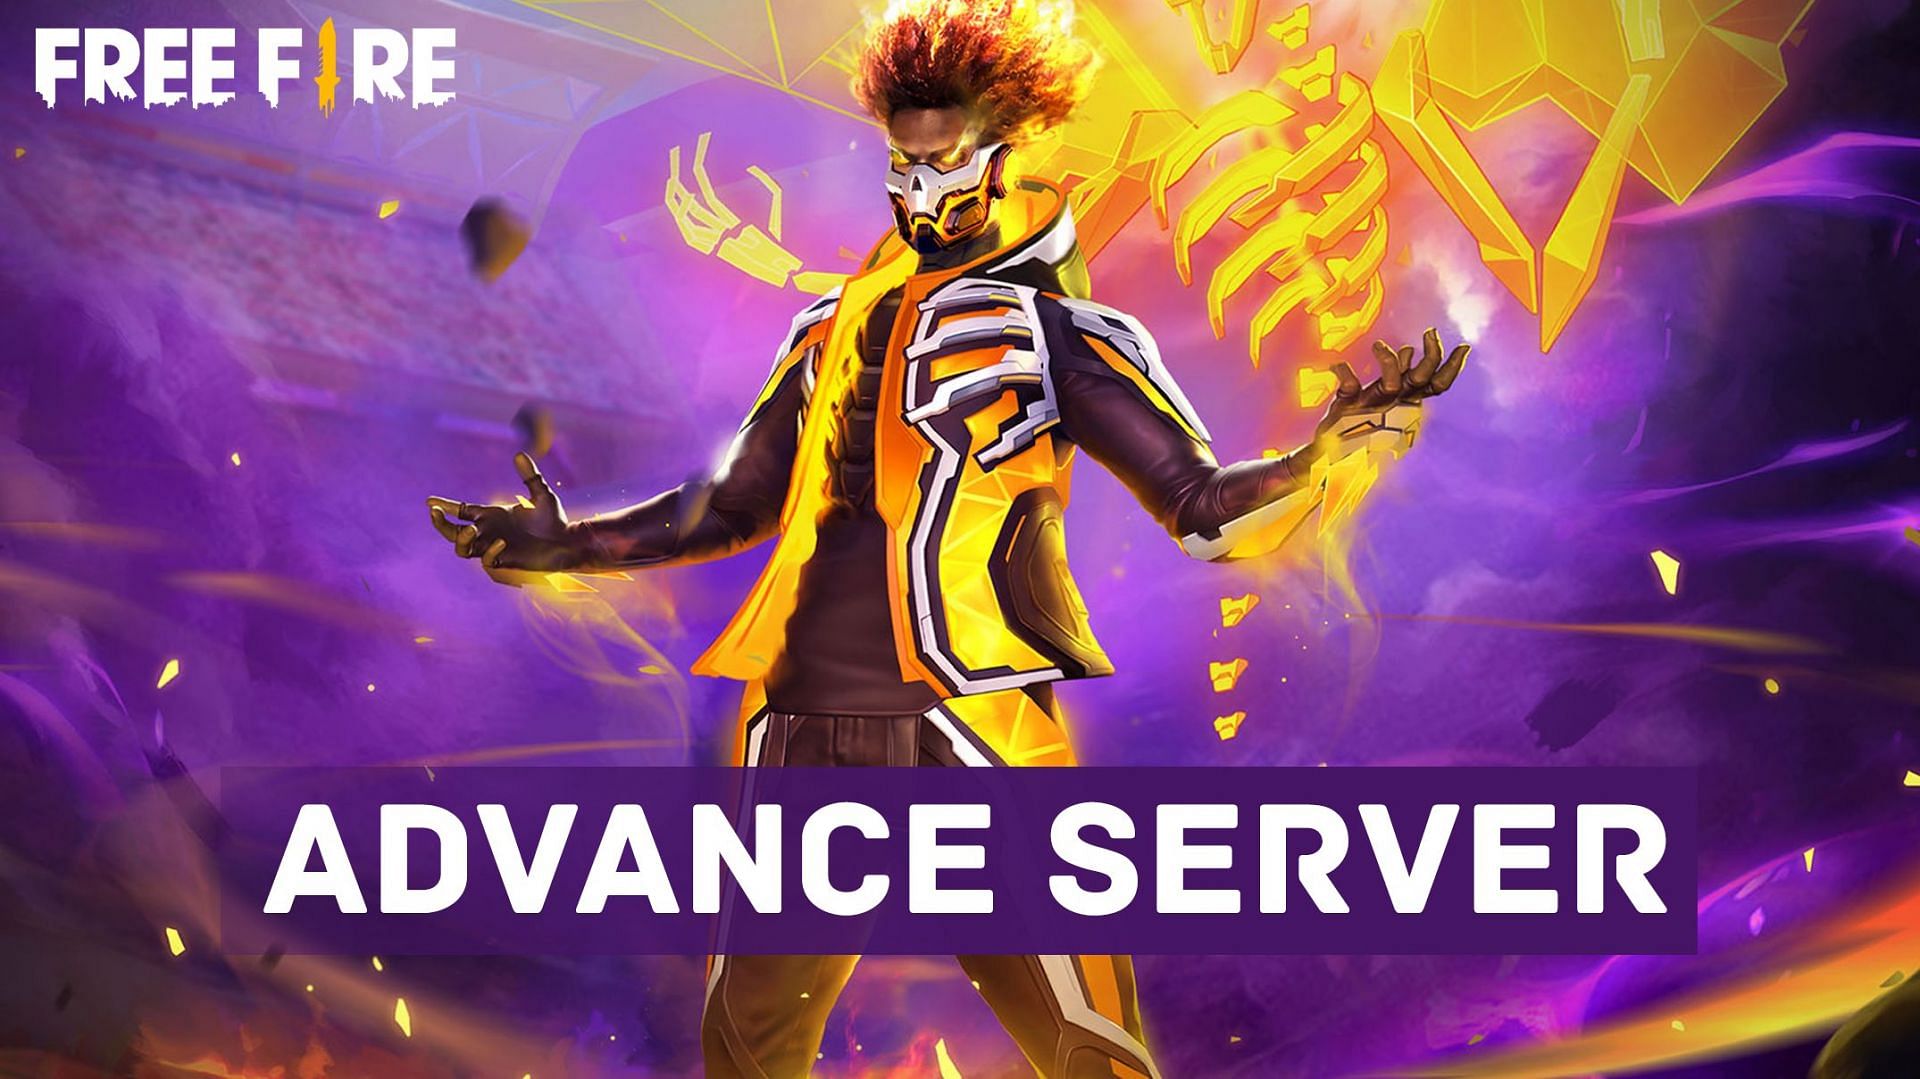 Fans are excited for the Free Fire OB32 Advance Server (Image via Sportskeeda)